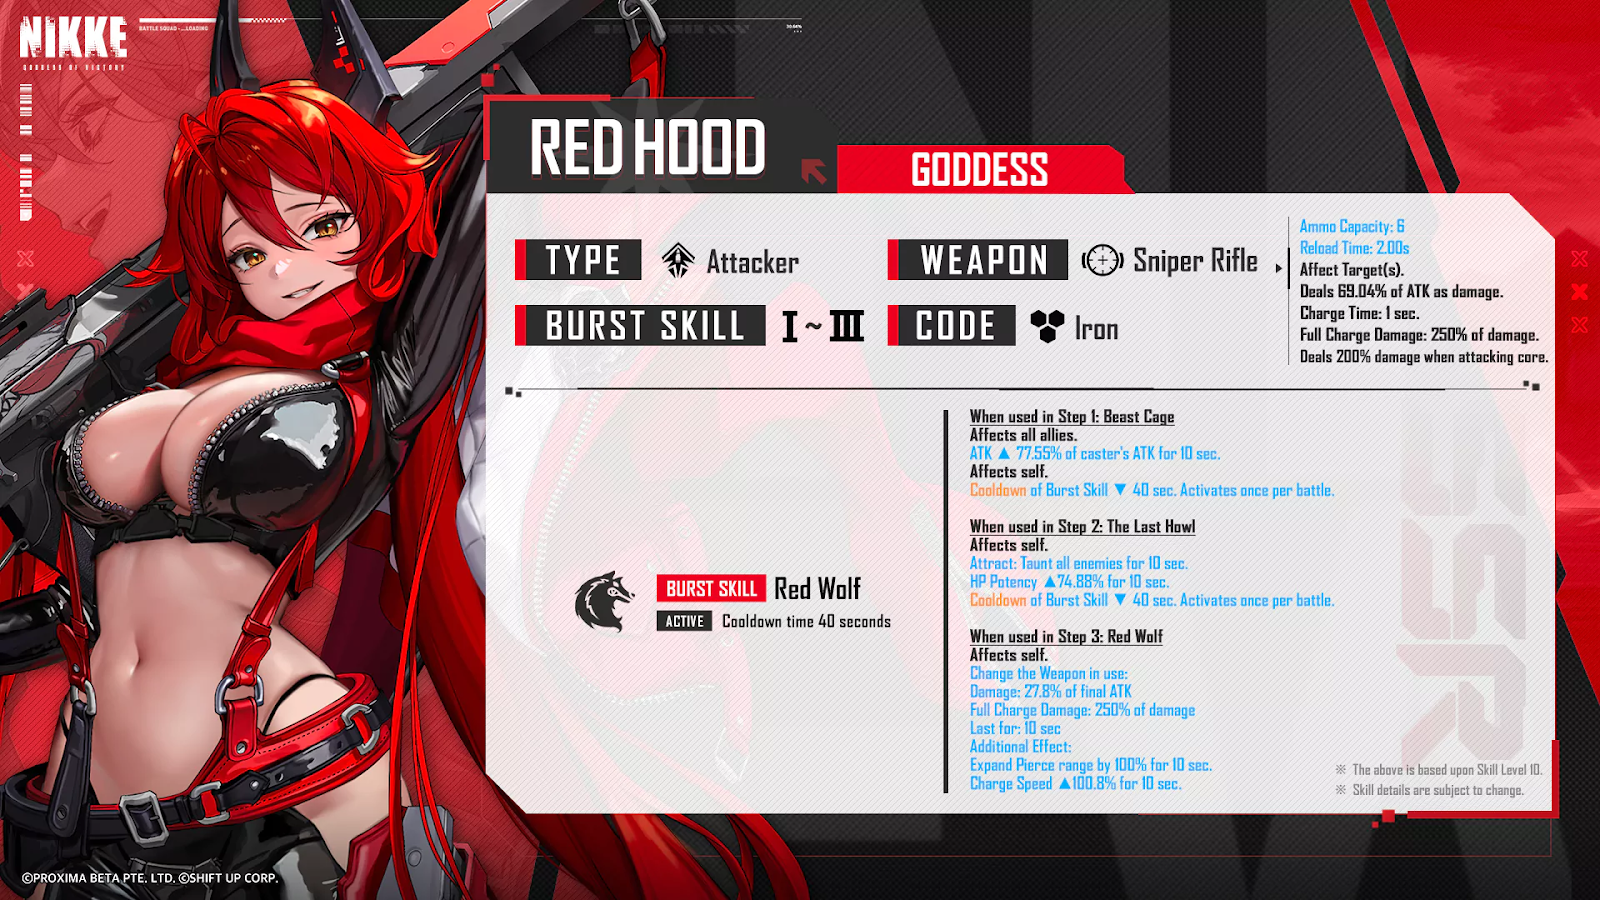 Red Hood stats